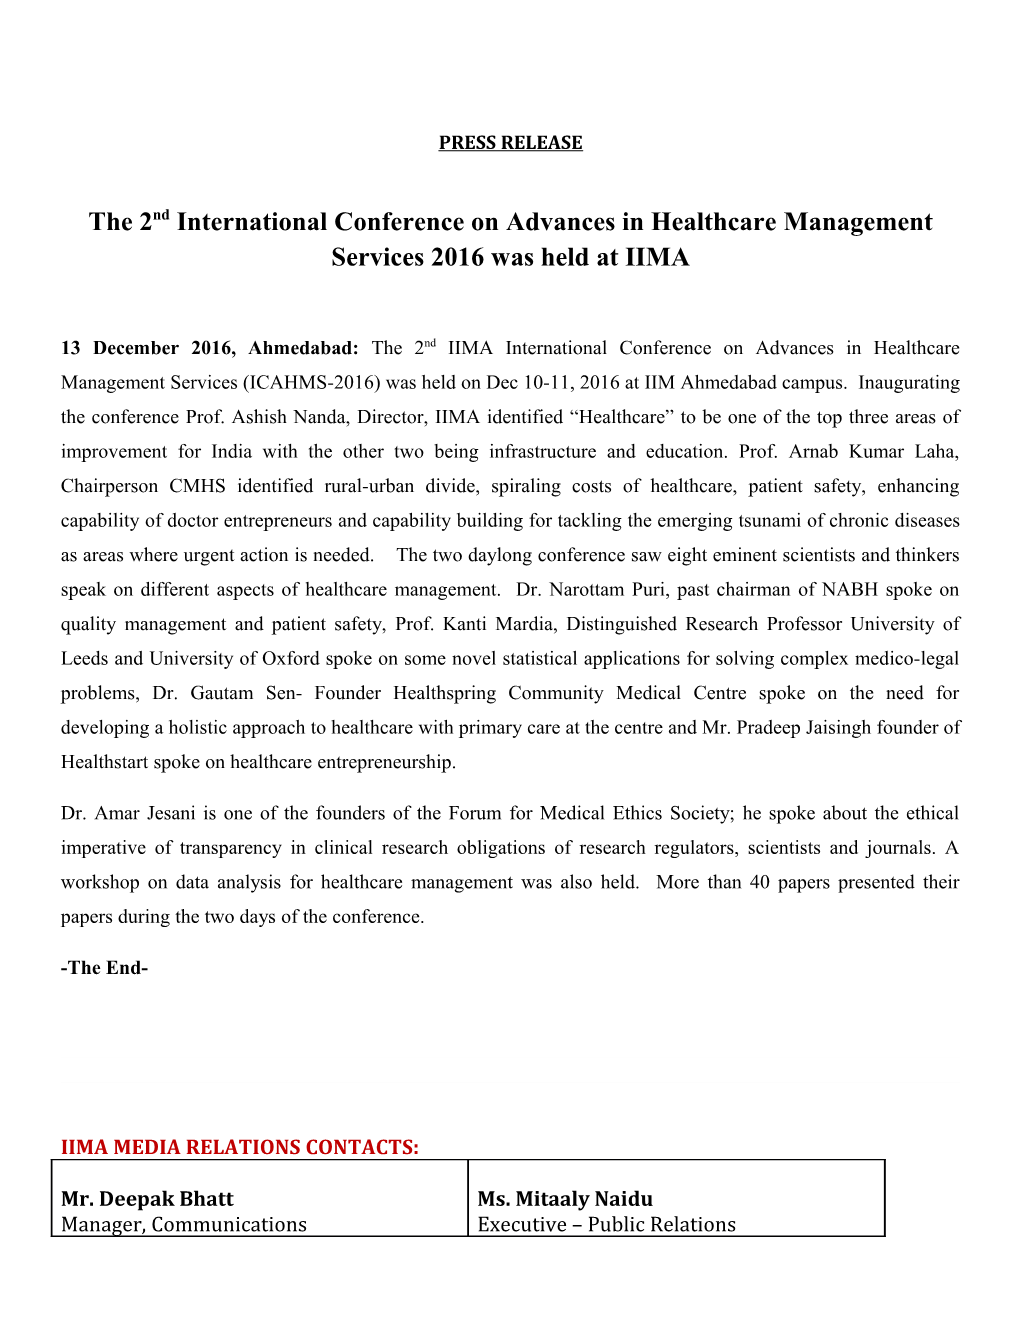 The 2Nd International Conference on Advances in Healthcare Management Services 2016 Was